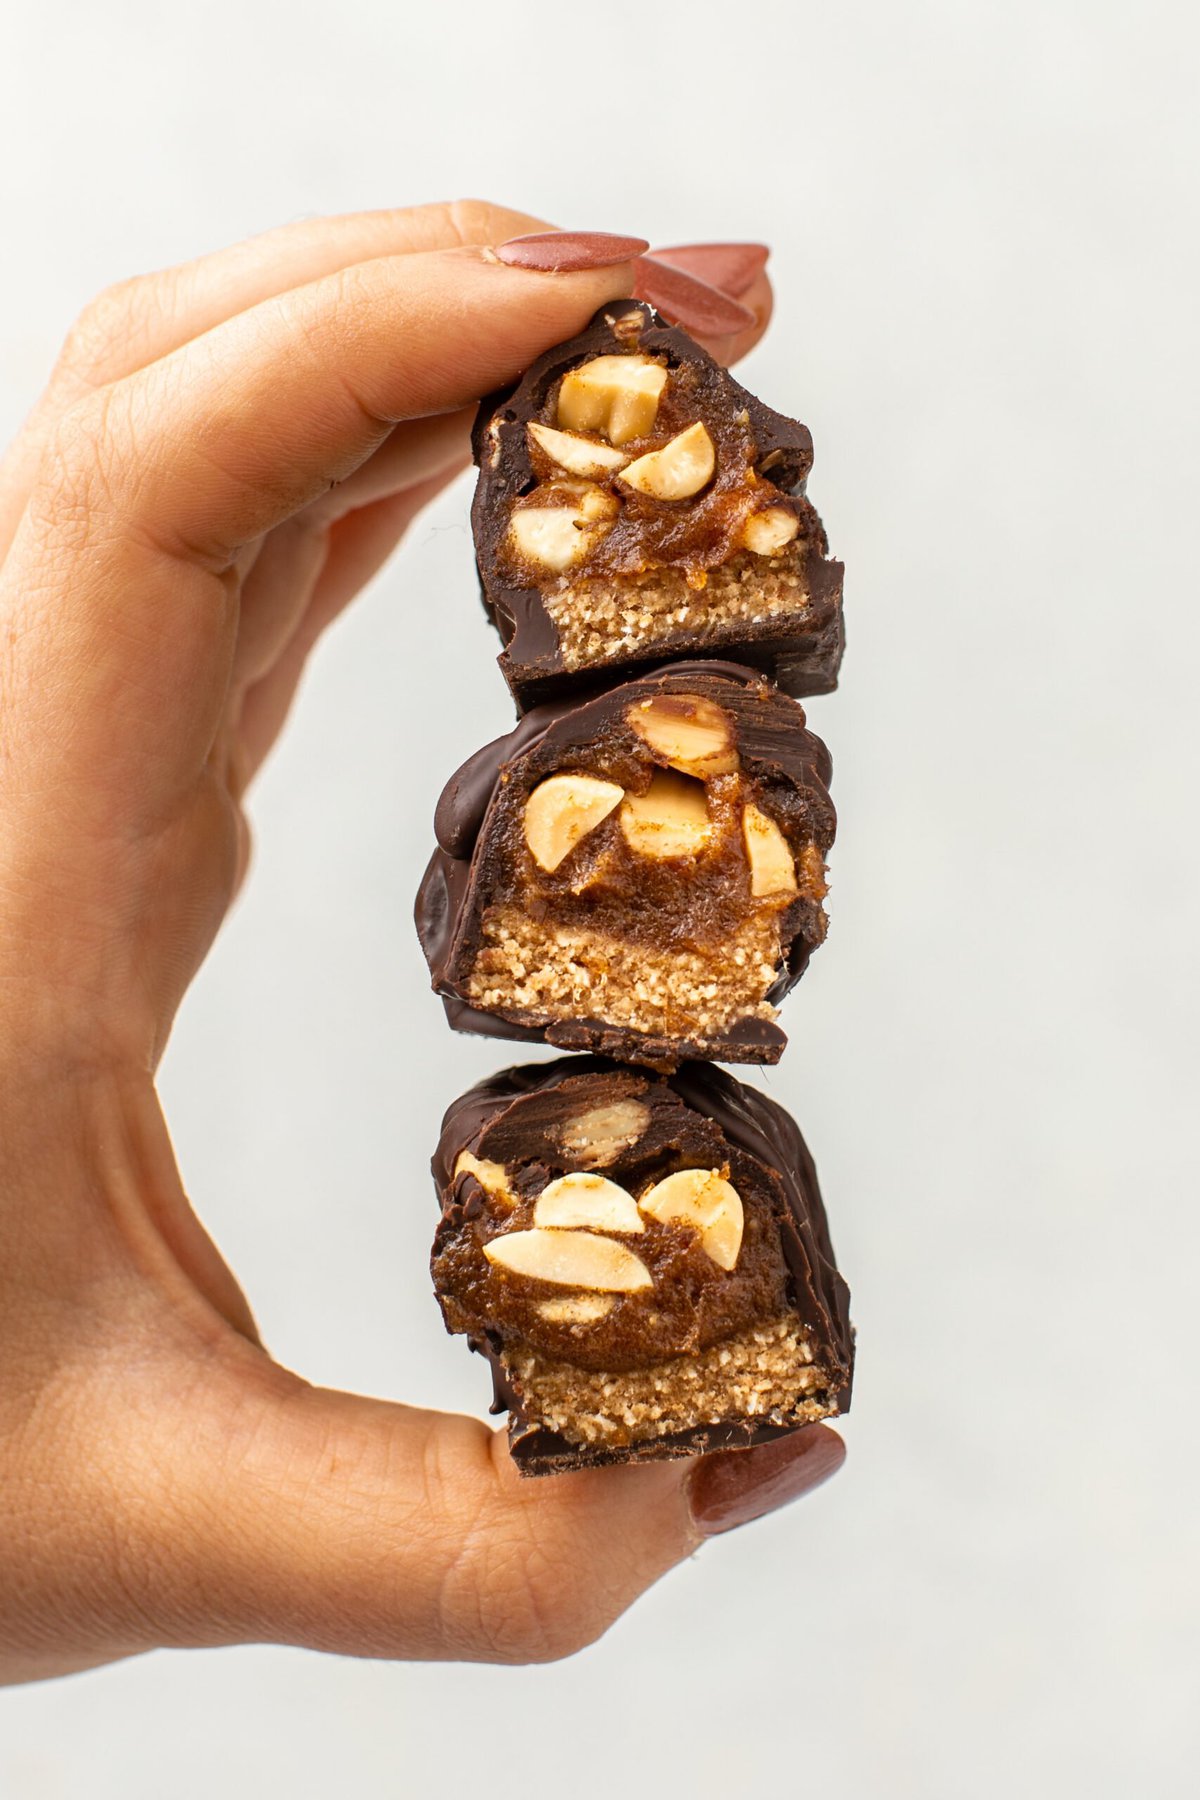 https://frommybowl.com/wp-content/uploads/2021/11/Vegan_Snickers_Bars_GlutenFree_FromMyBowl-22-scaled.jpg